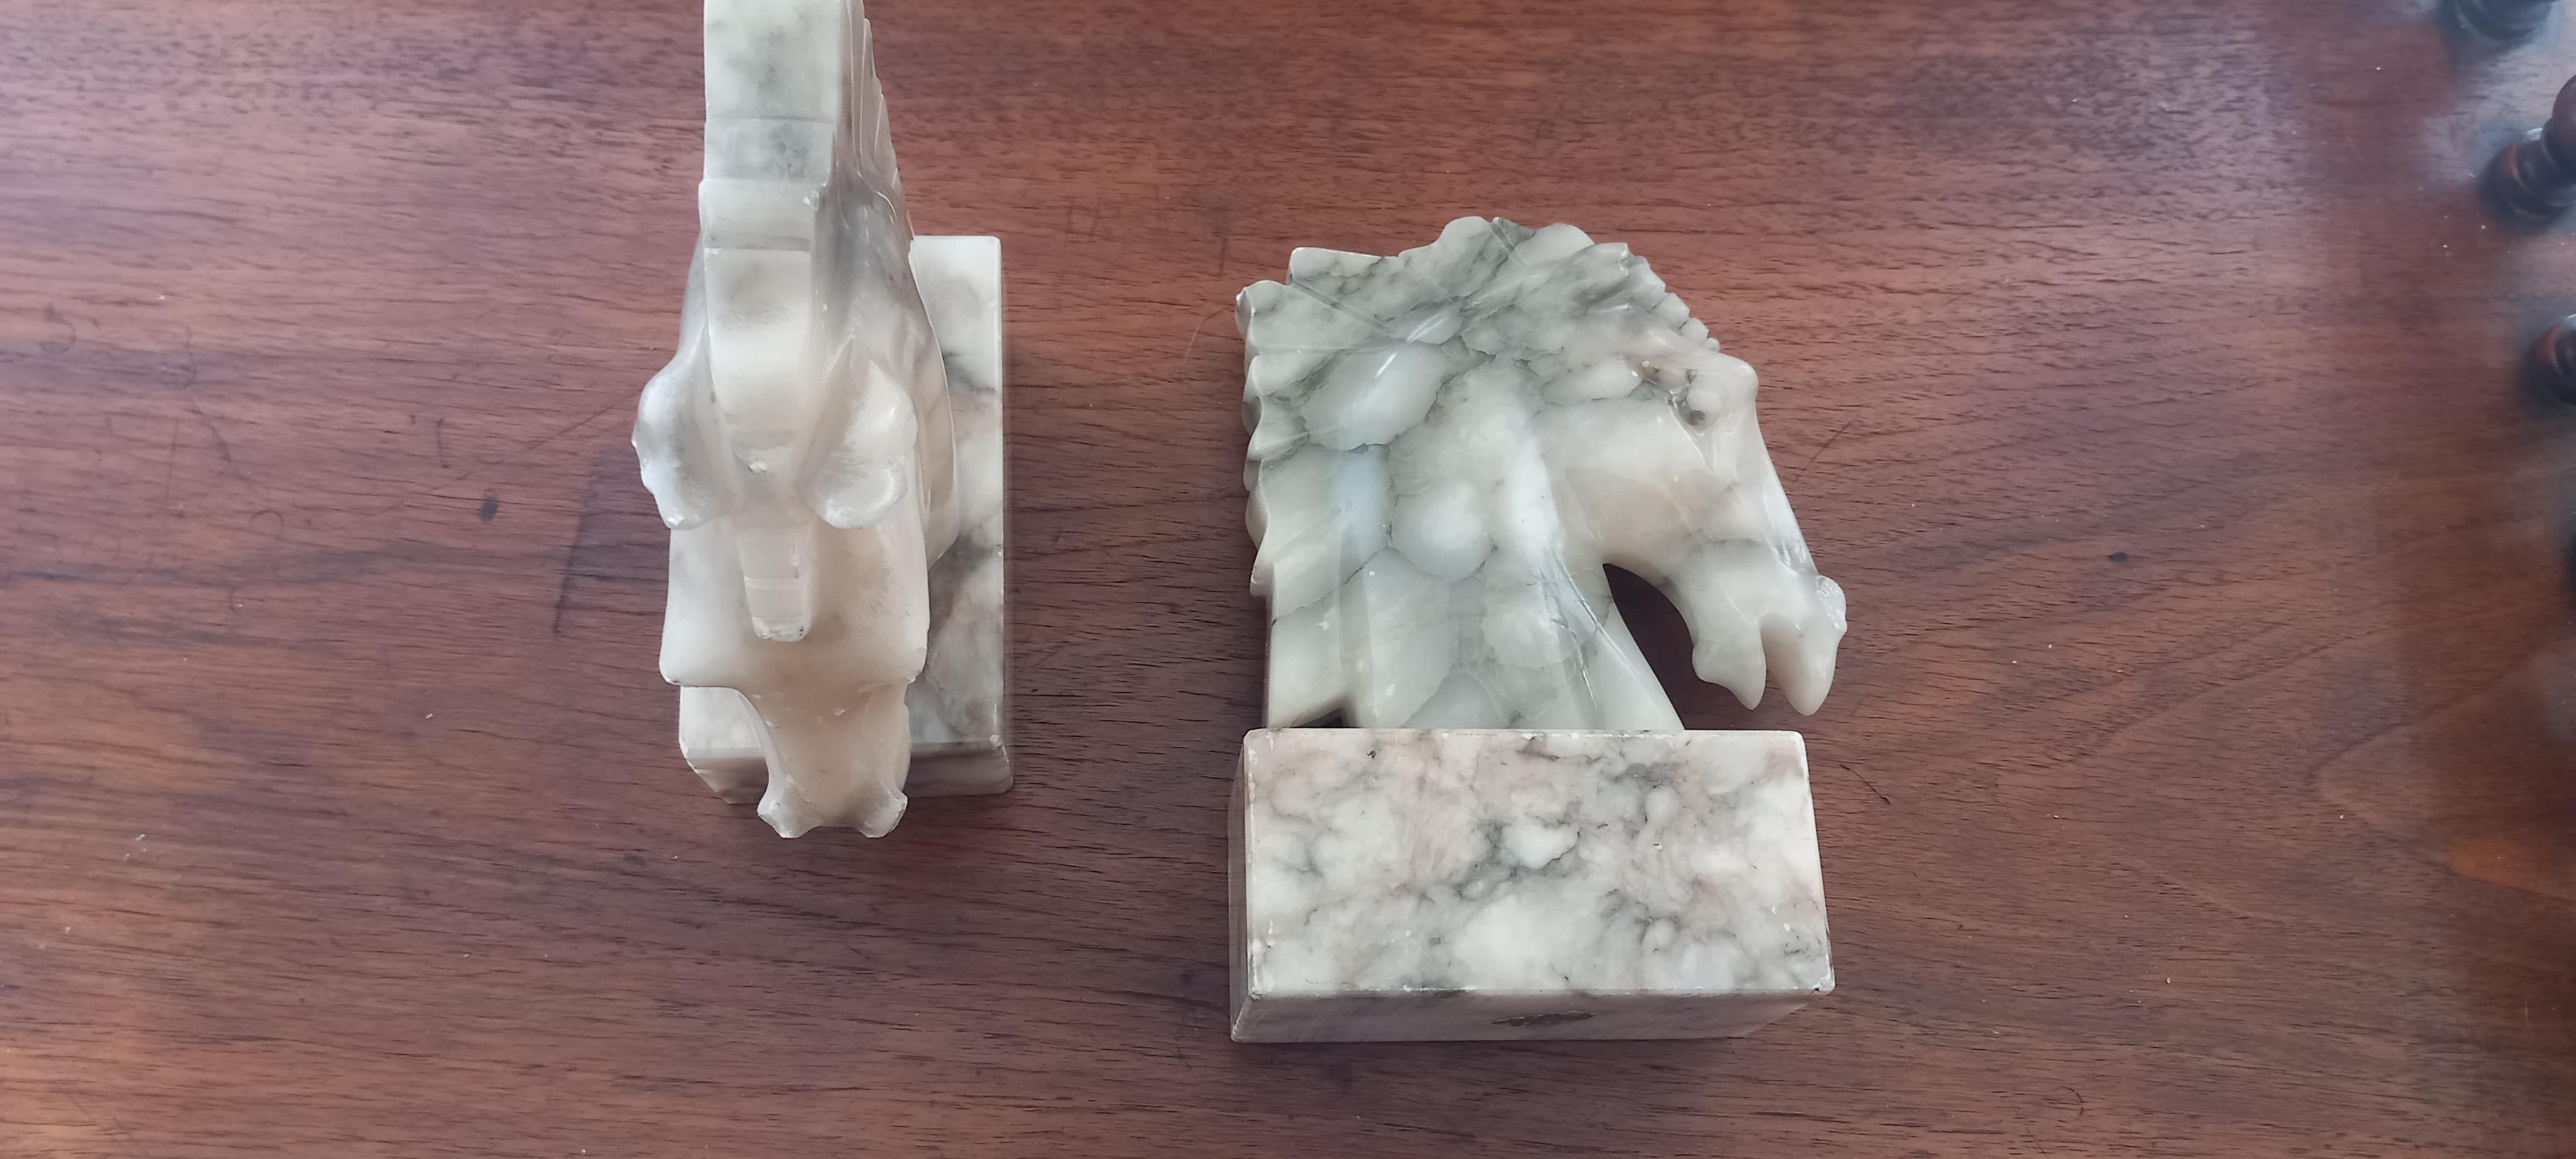 Art Deco bookends, curiosity, they are two figures sculptures in the shape of a horse, in white/grey veined marble

They are very decorative functional pieces and at the same time they are very beautiful

Relics of the workshops that were in Spain